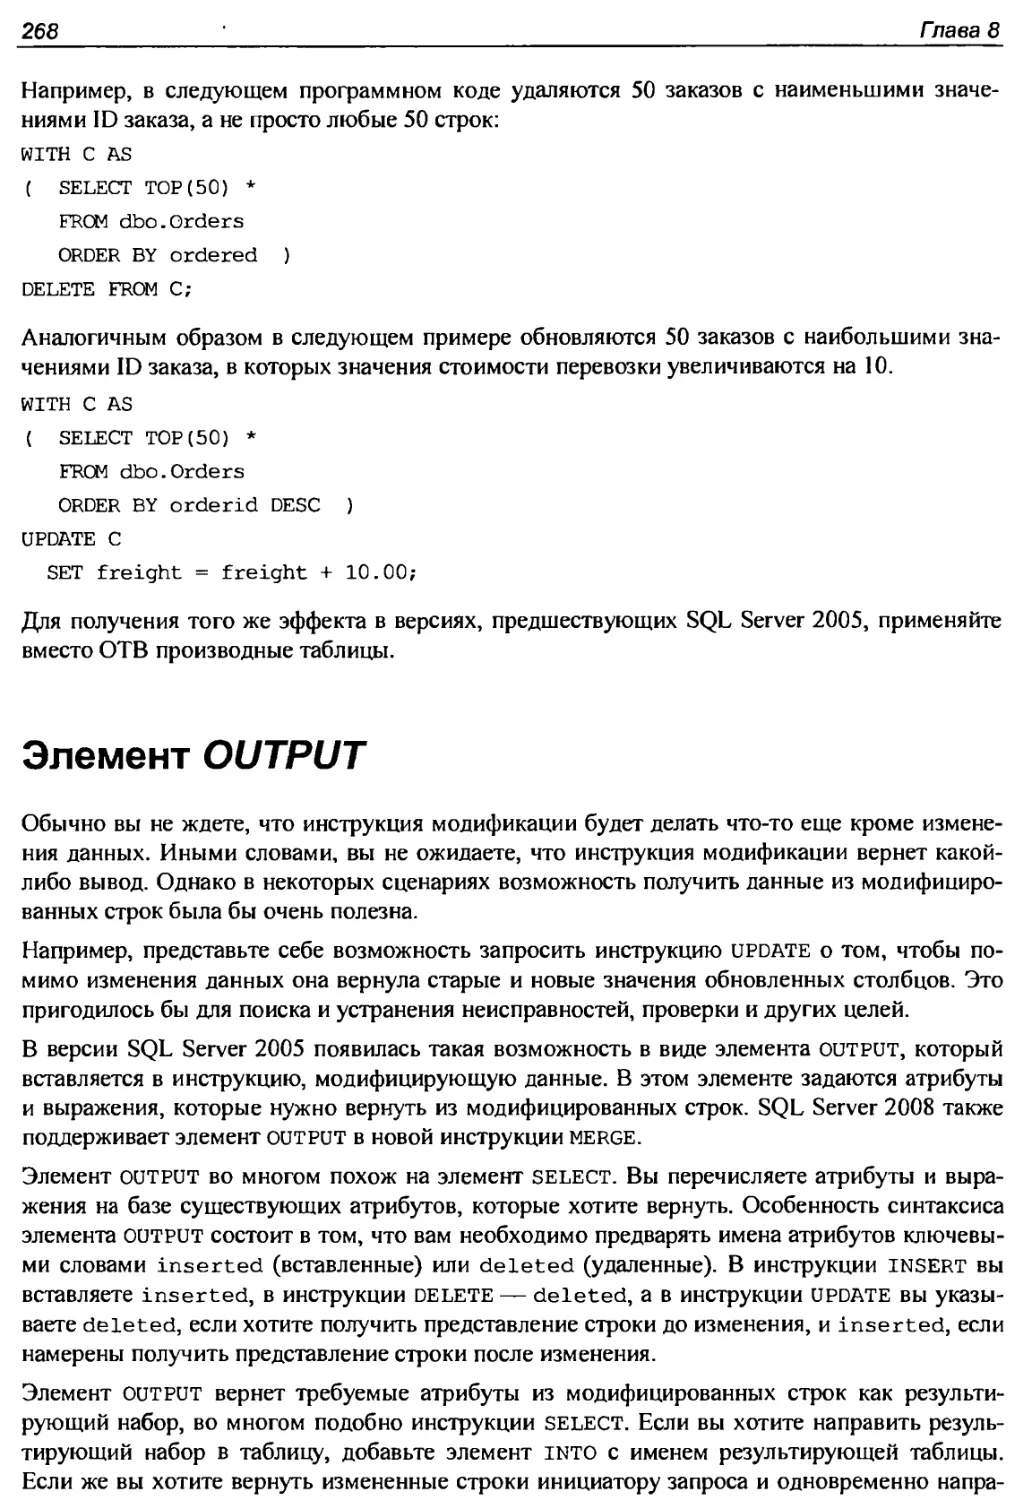 Элемент OUTPUT